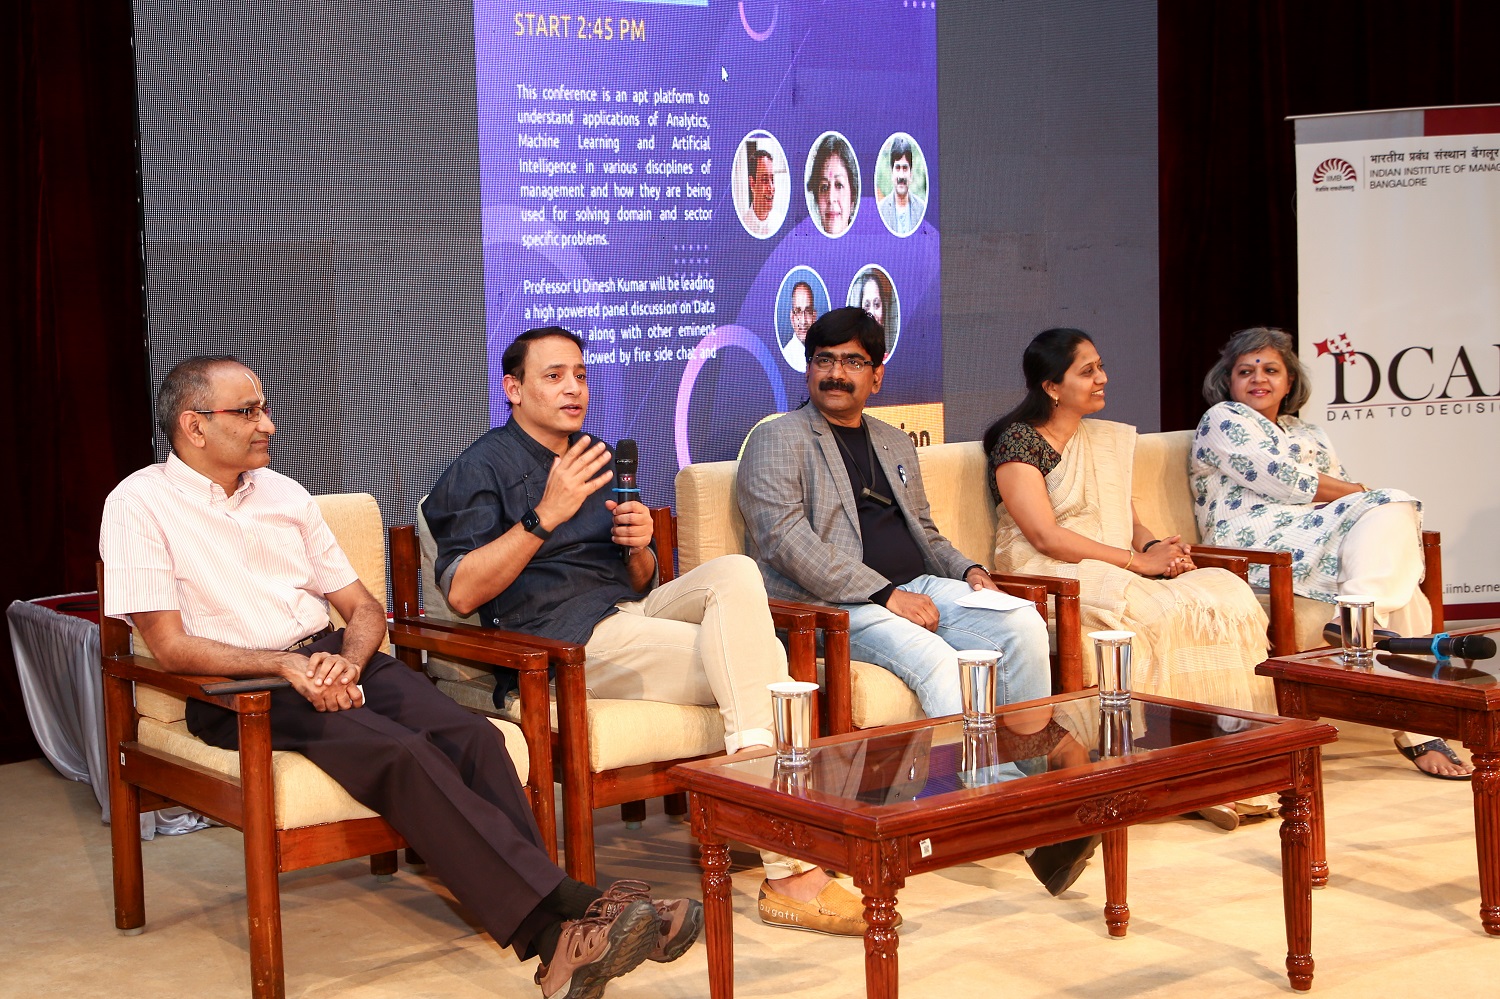 (L-R): Raman Narasimhan, Vice President, Cognizant Technology Solutions, Ameen Haque, Founder, Storywallahs, Prof. U Dinesh Kumar, Professor & Chair – DCAL, IIMB, Sharada Sringeswara, Research Consultant, Data Centre and Analytics Lab, IIMB, Debolina Dutta, Professor, OB & HRM, IIMB during the panel discussion on ‘Data Storytelling’ during the 9th International Conference on Business Analytics and Intelligence.